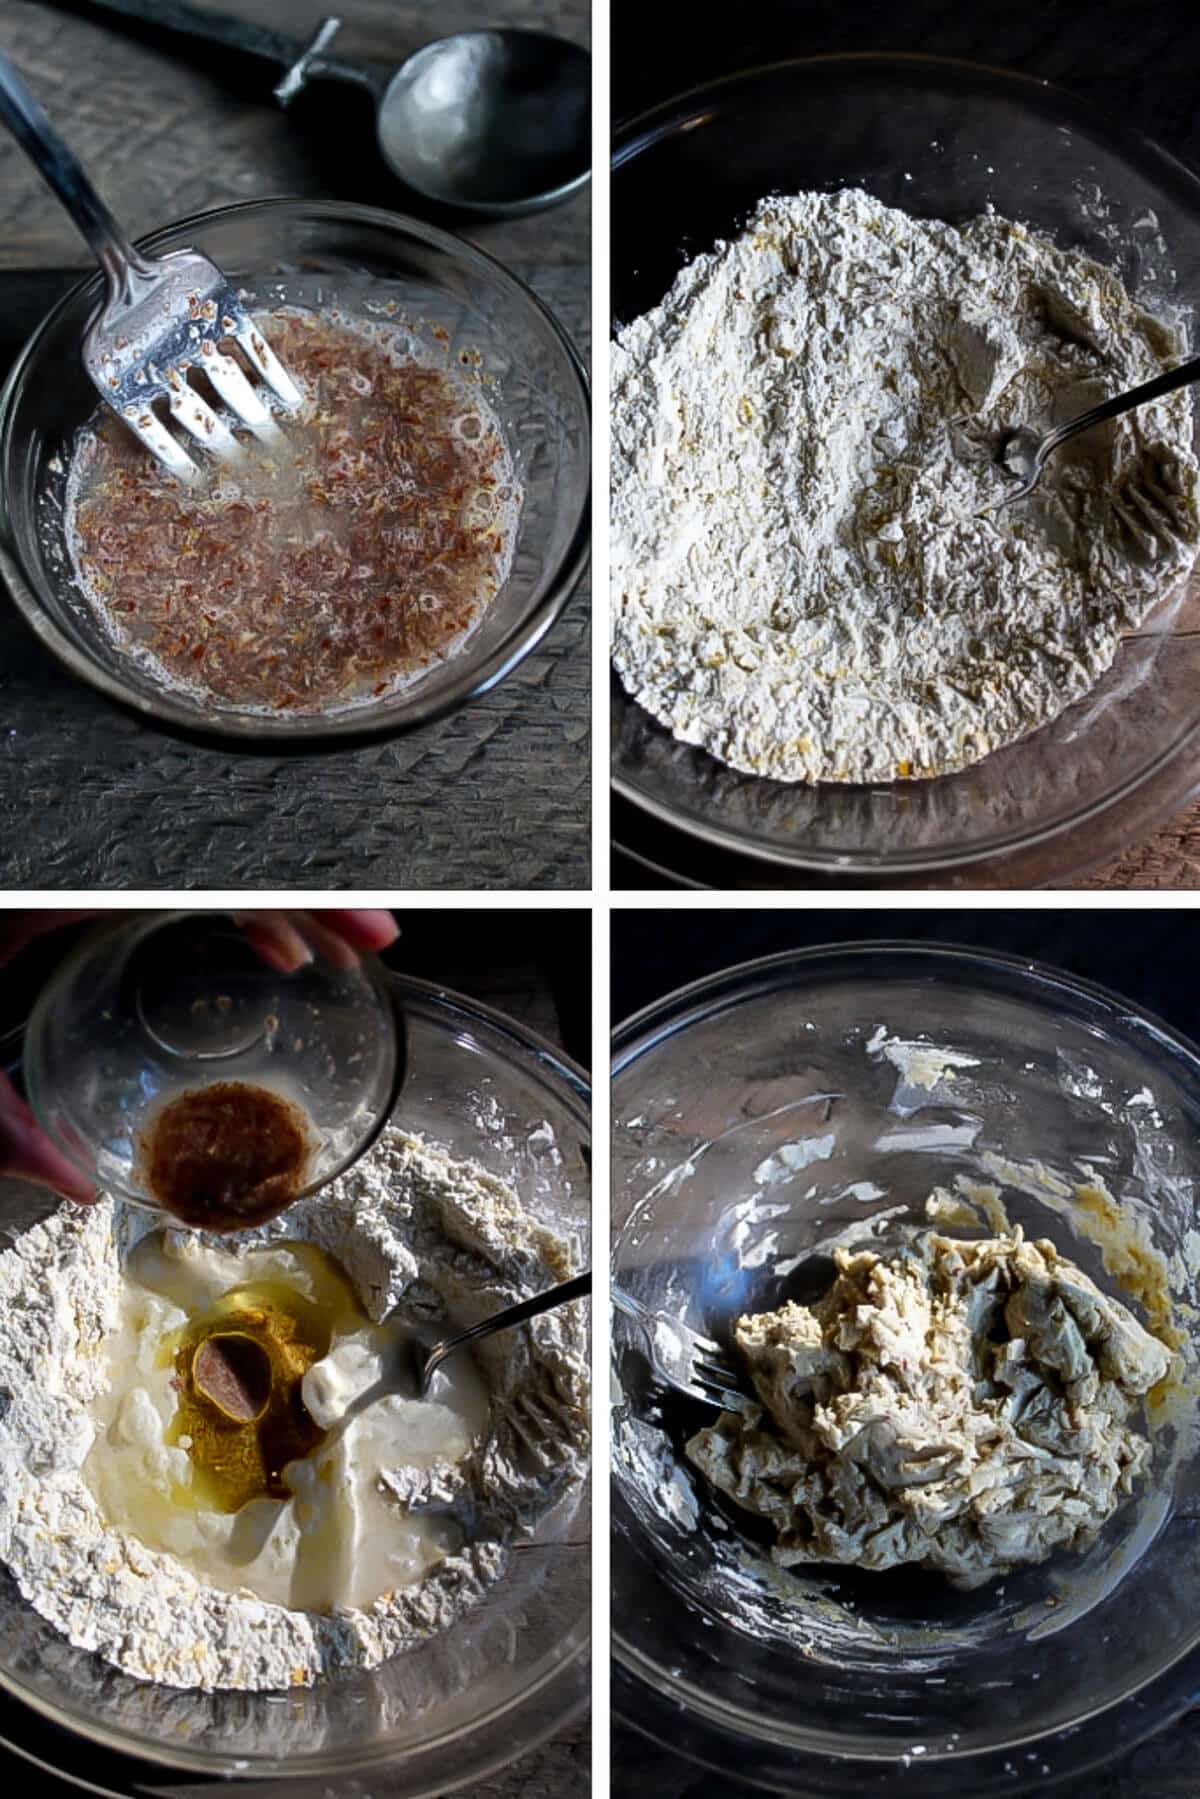 Four pictures showing the process of mixing the flax egg, and mixing the dry and wet ingredients to form a dough.